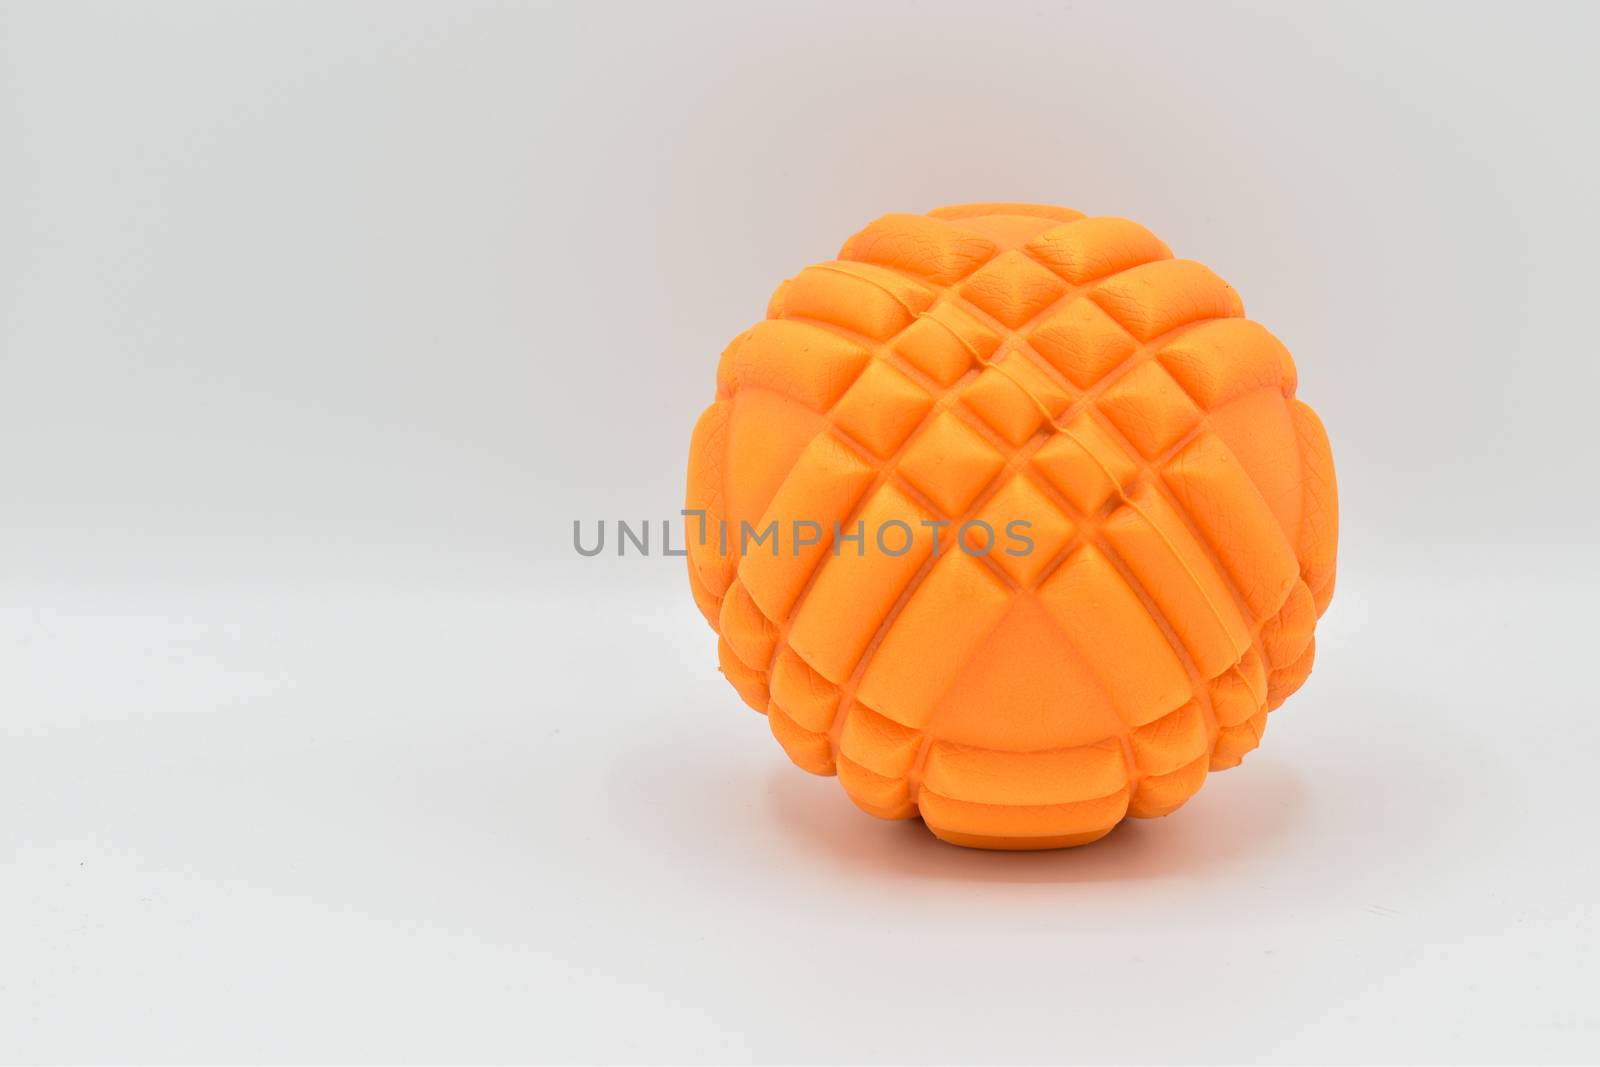 Foam roller ball isolated on white background by benentaylor